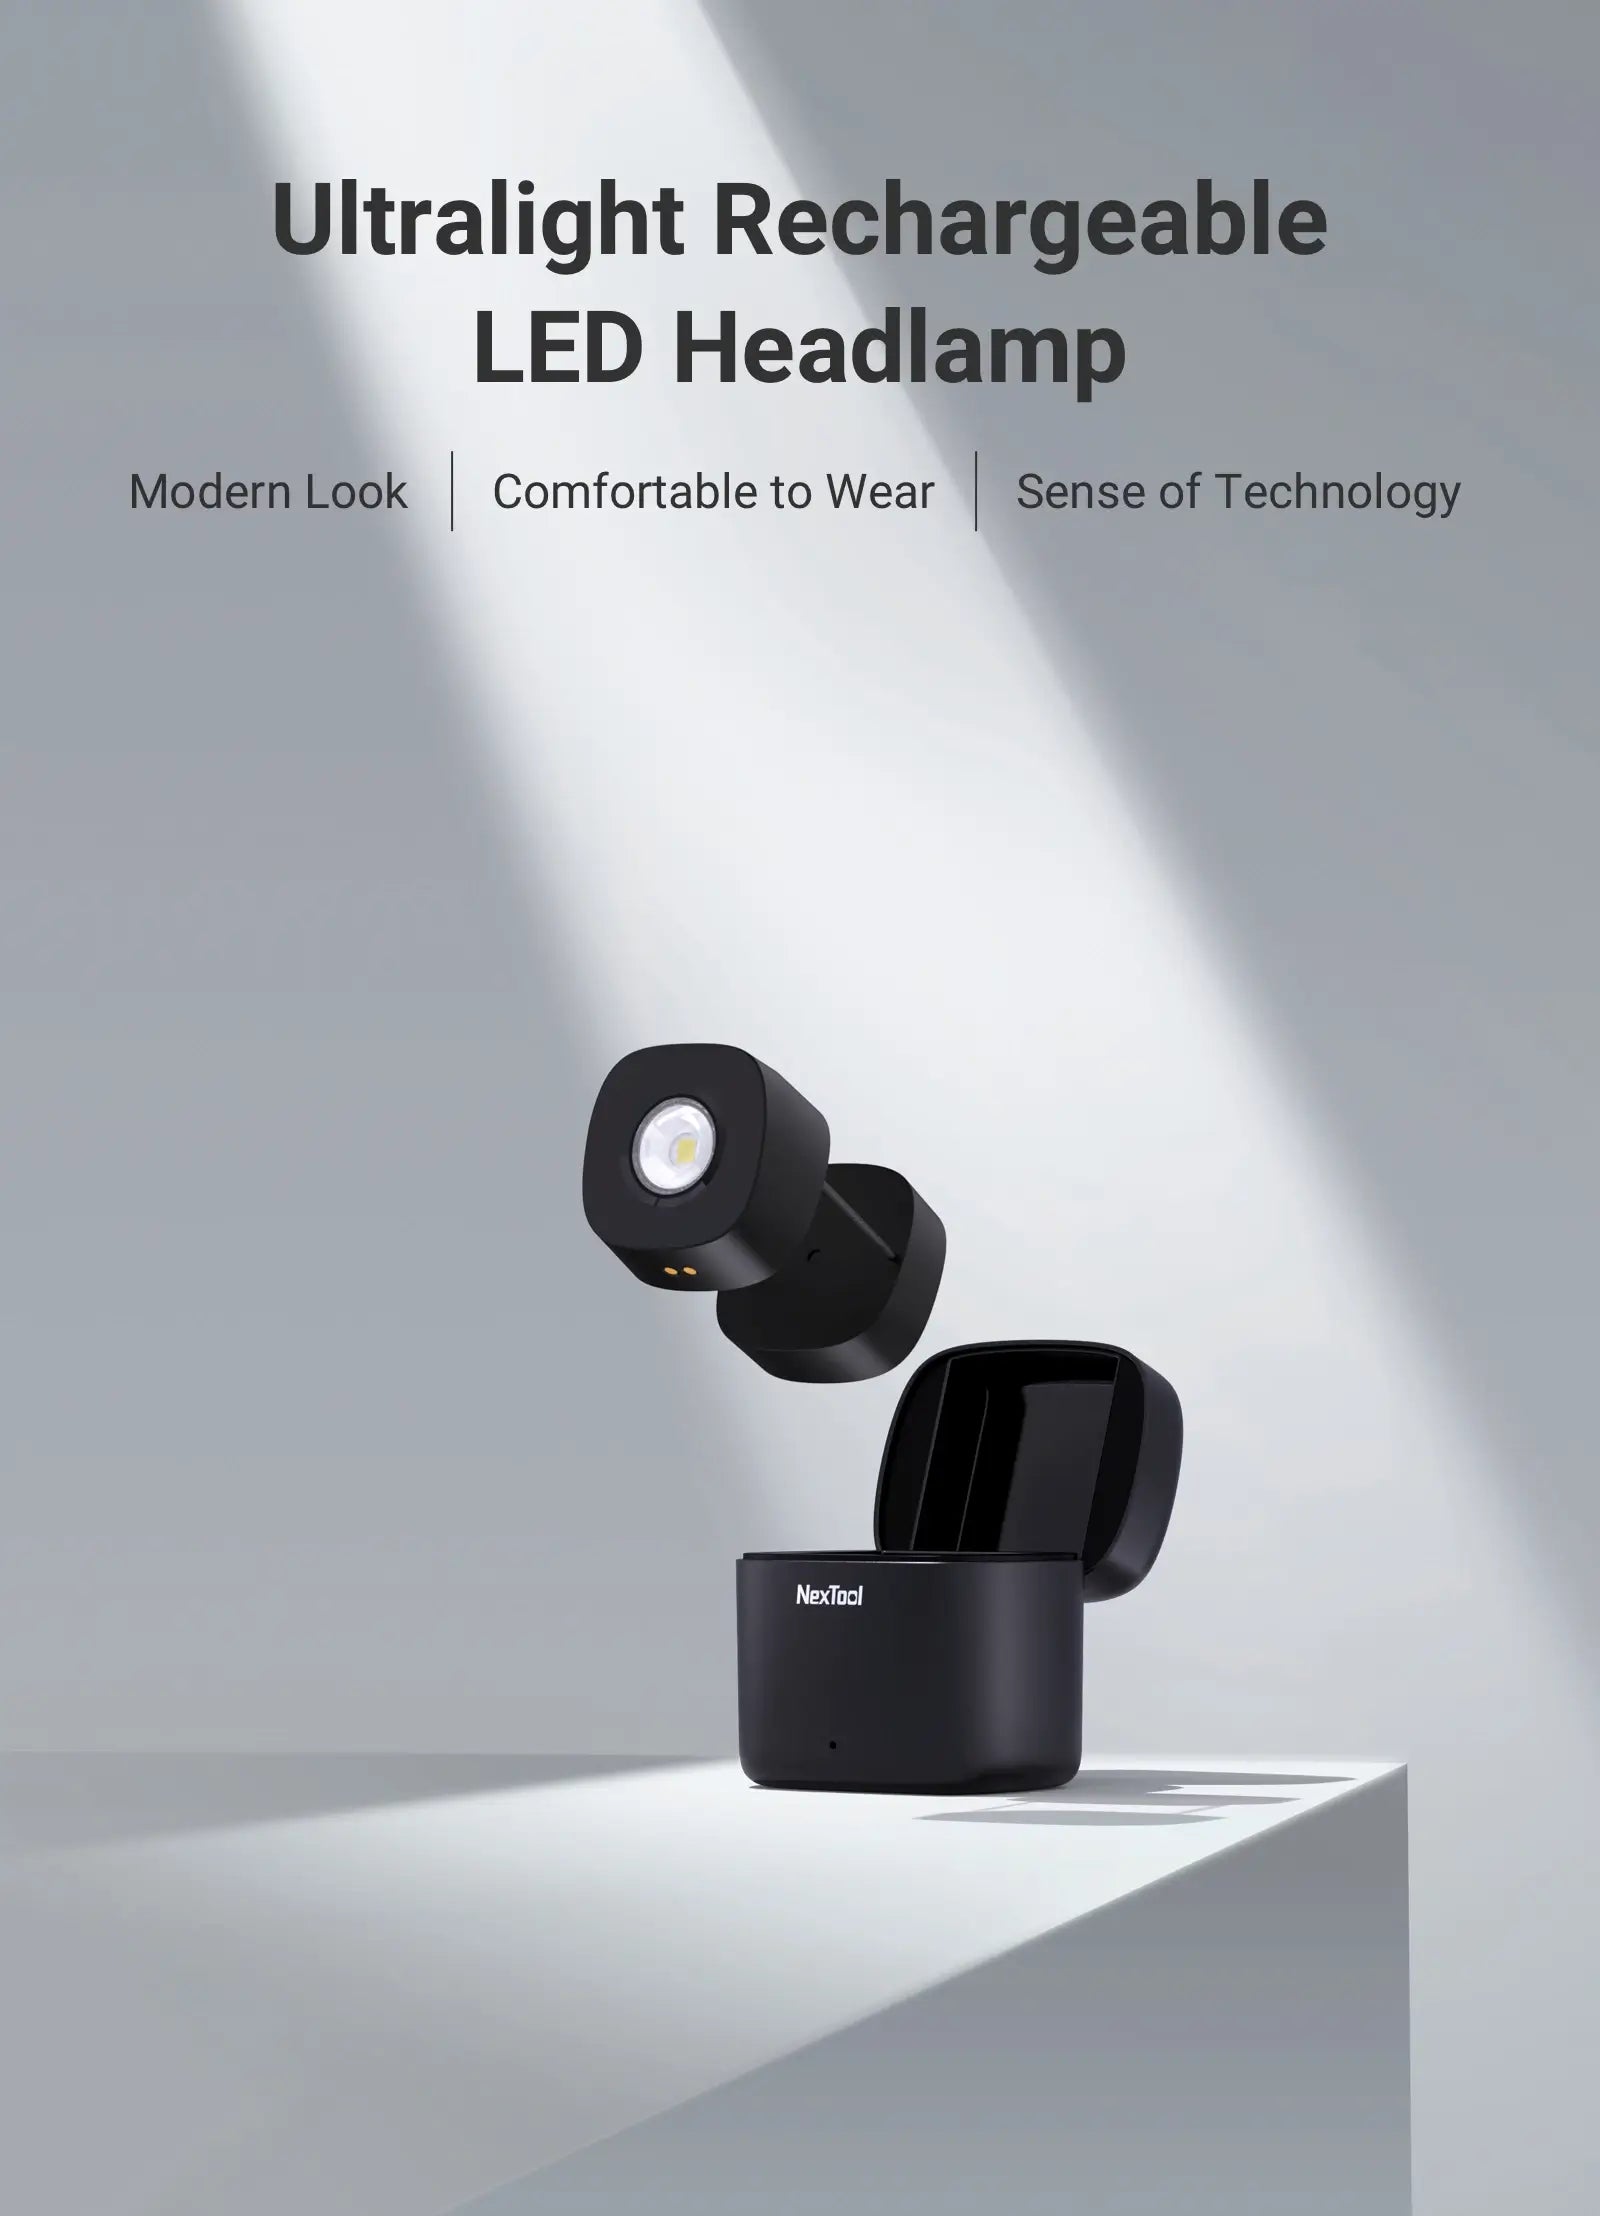 Ultralight Rechargeable LED Headlamp Modern Look Comfortable to Wear Sense of Technology